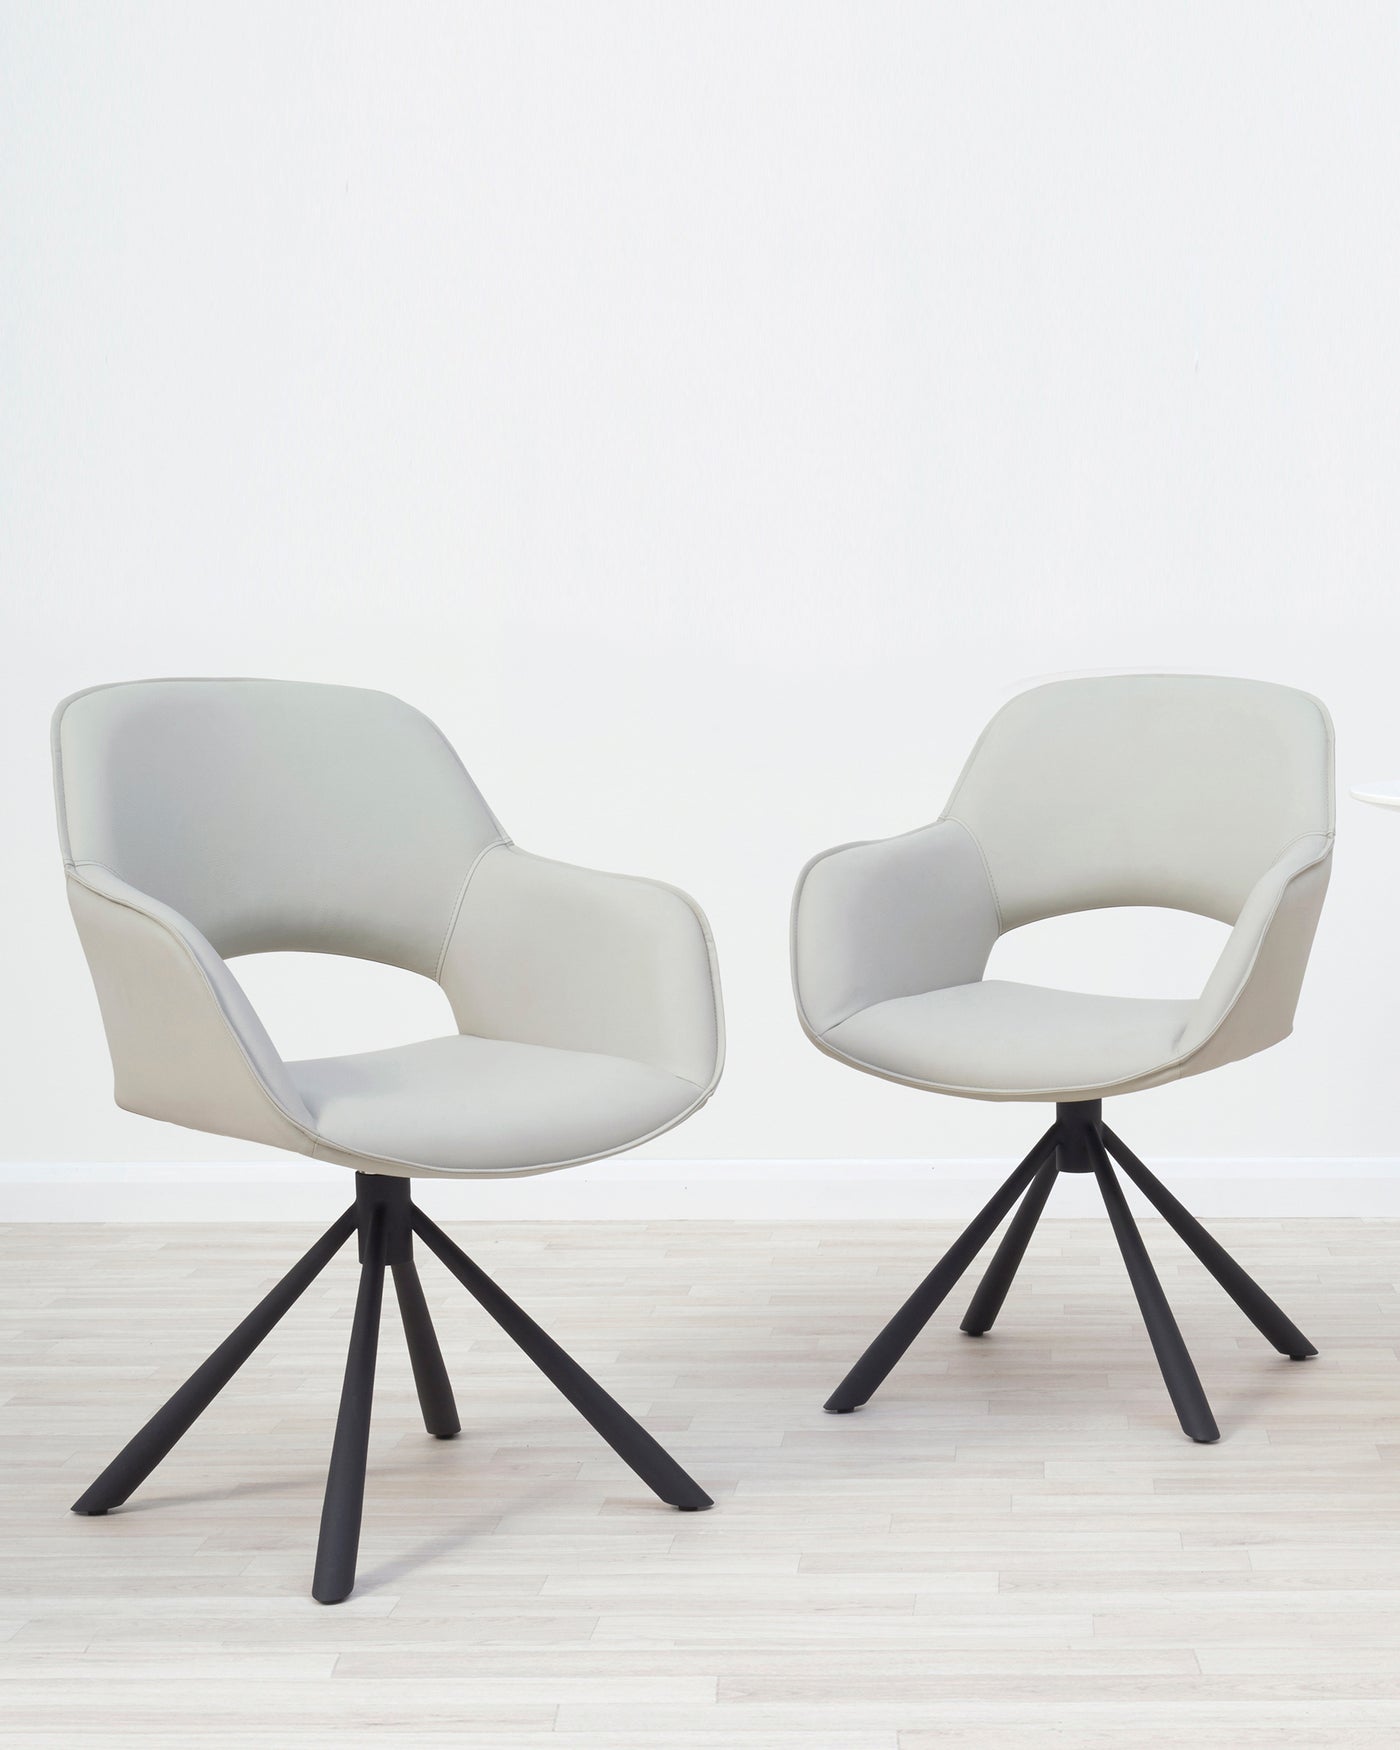 Two modern light grey upholstered accent chairs with black four-pointed star base, placed on a light hardwood floor against a white wall.